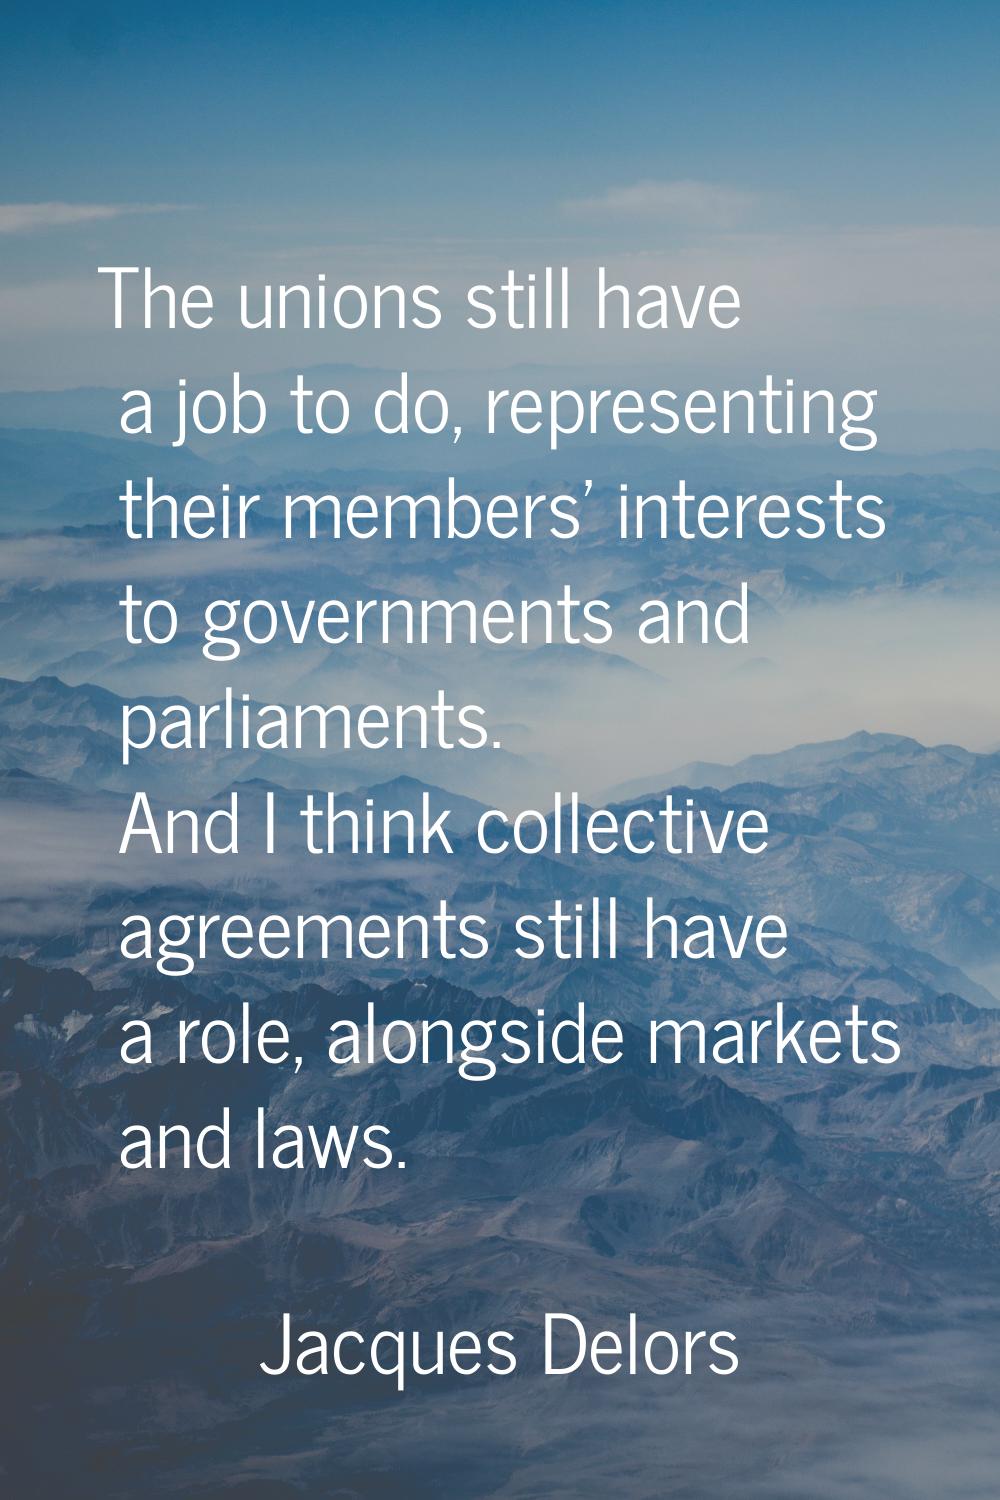 The unions still have a job to do, representing their members' interests to governments and parliam